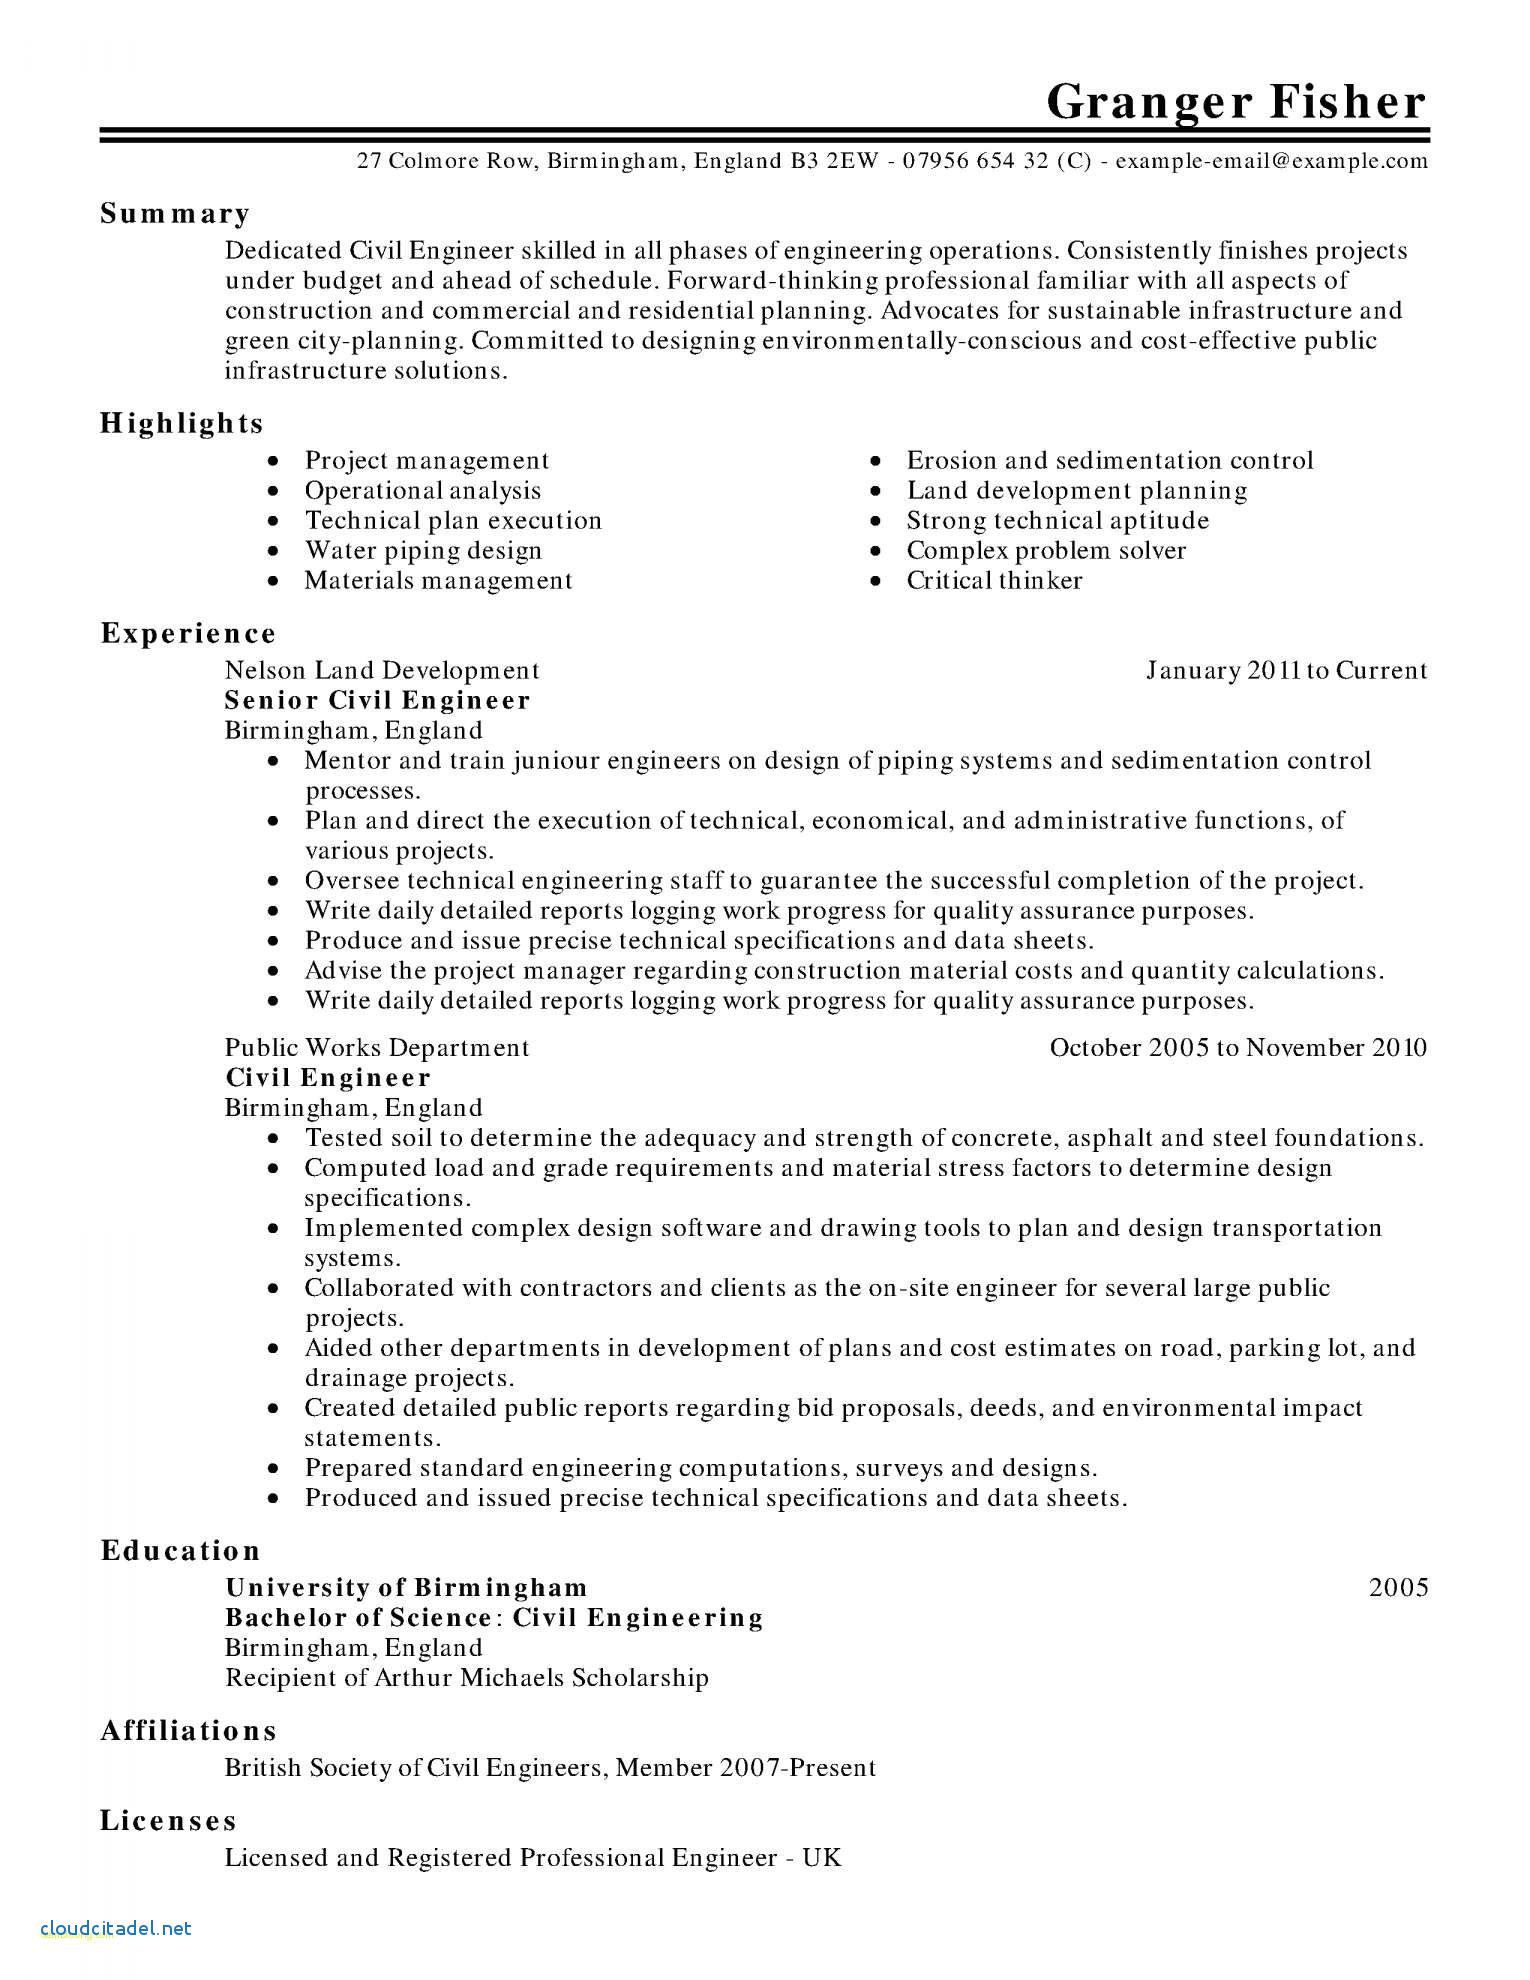 sample of application letter for employment as a teacher